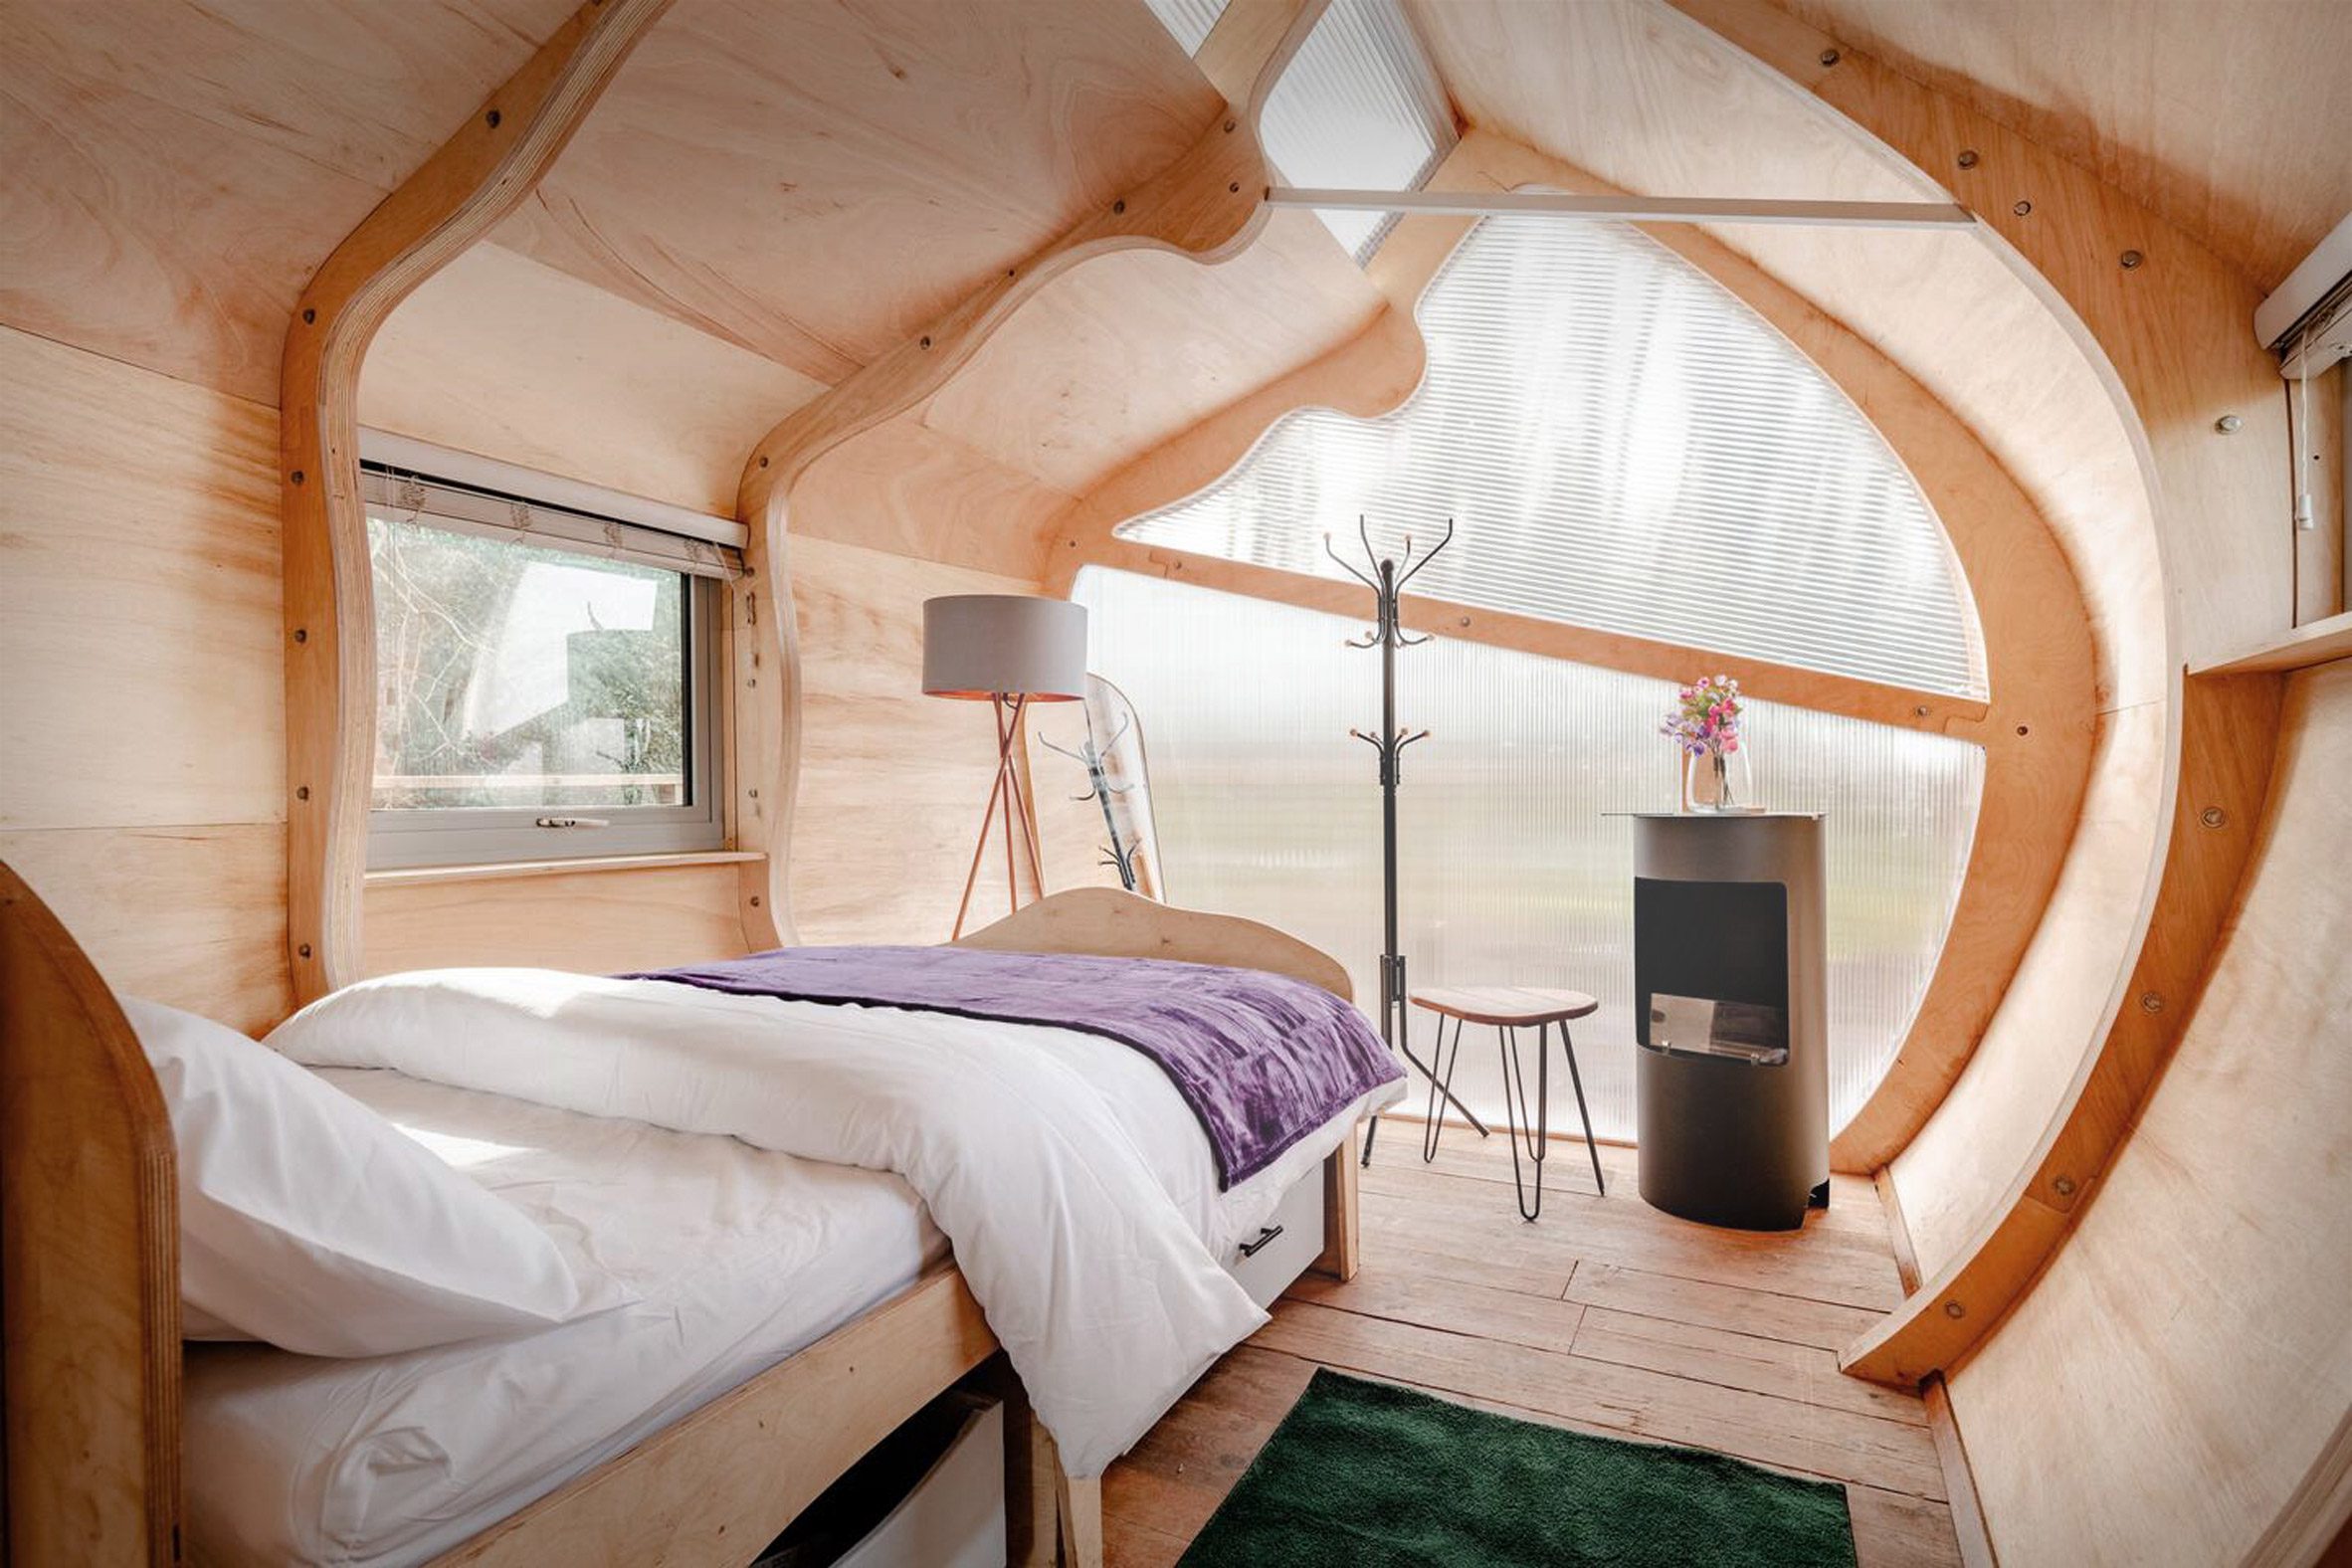 Bedroom interior within timber cabin designed by Peter Markos